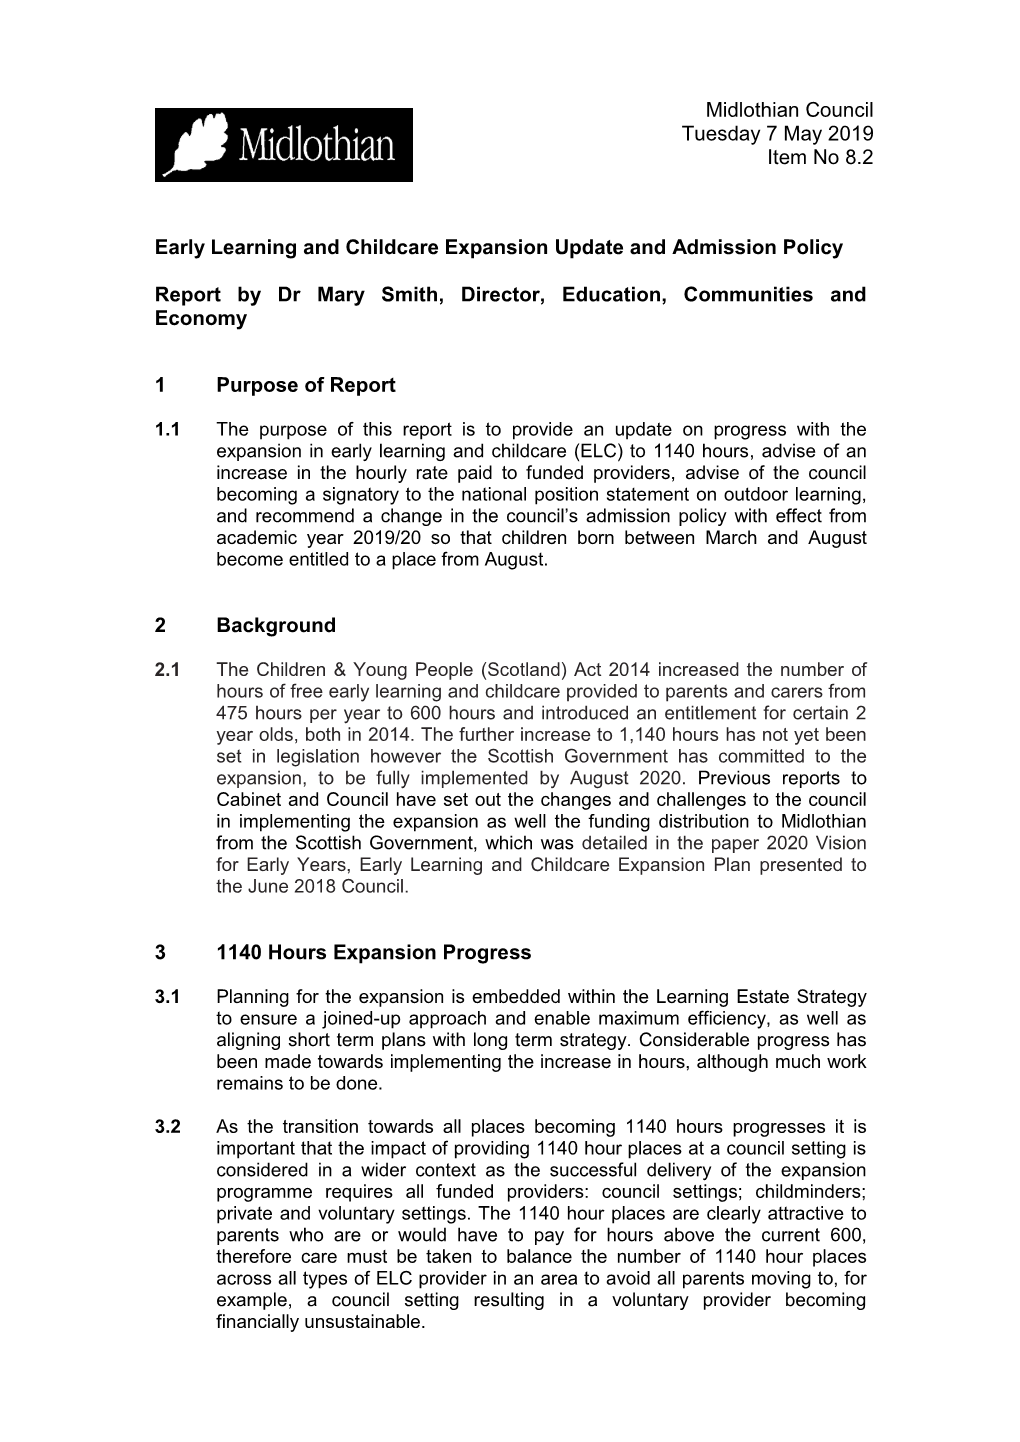 Midlothian Council Tuesday 7 May 2019 Item No 8.2 Early Learning and Childcare Expansion Update and Admission Policy Report By